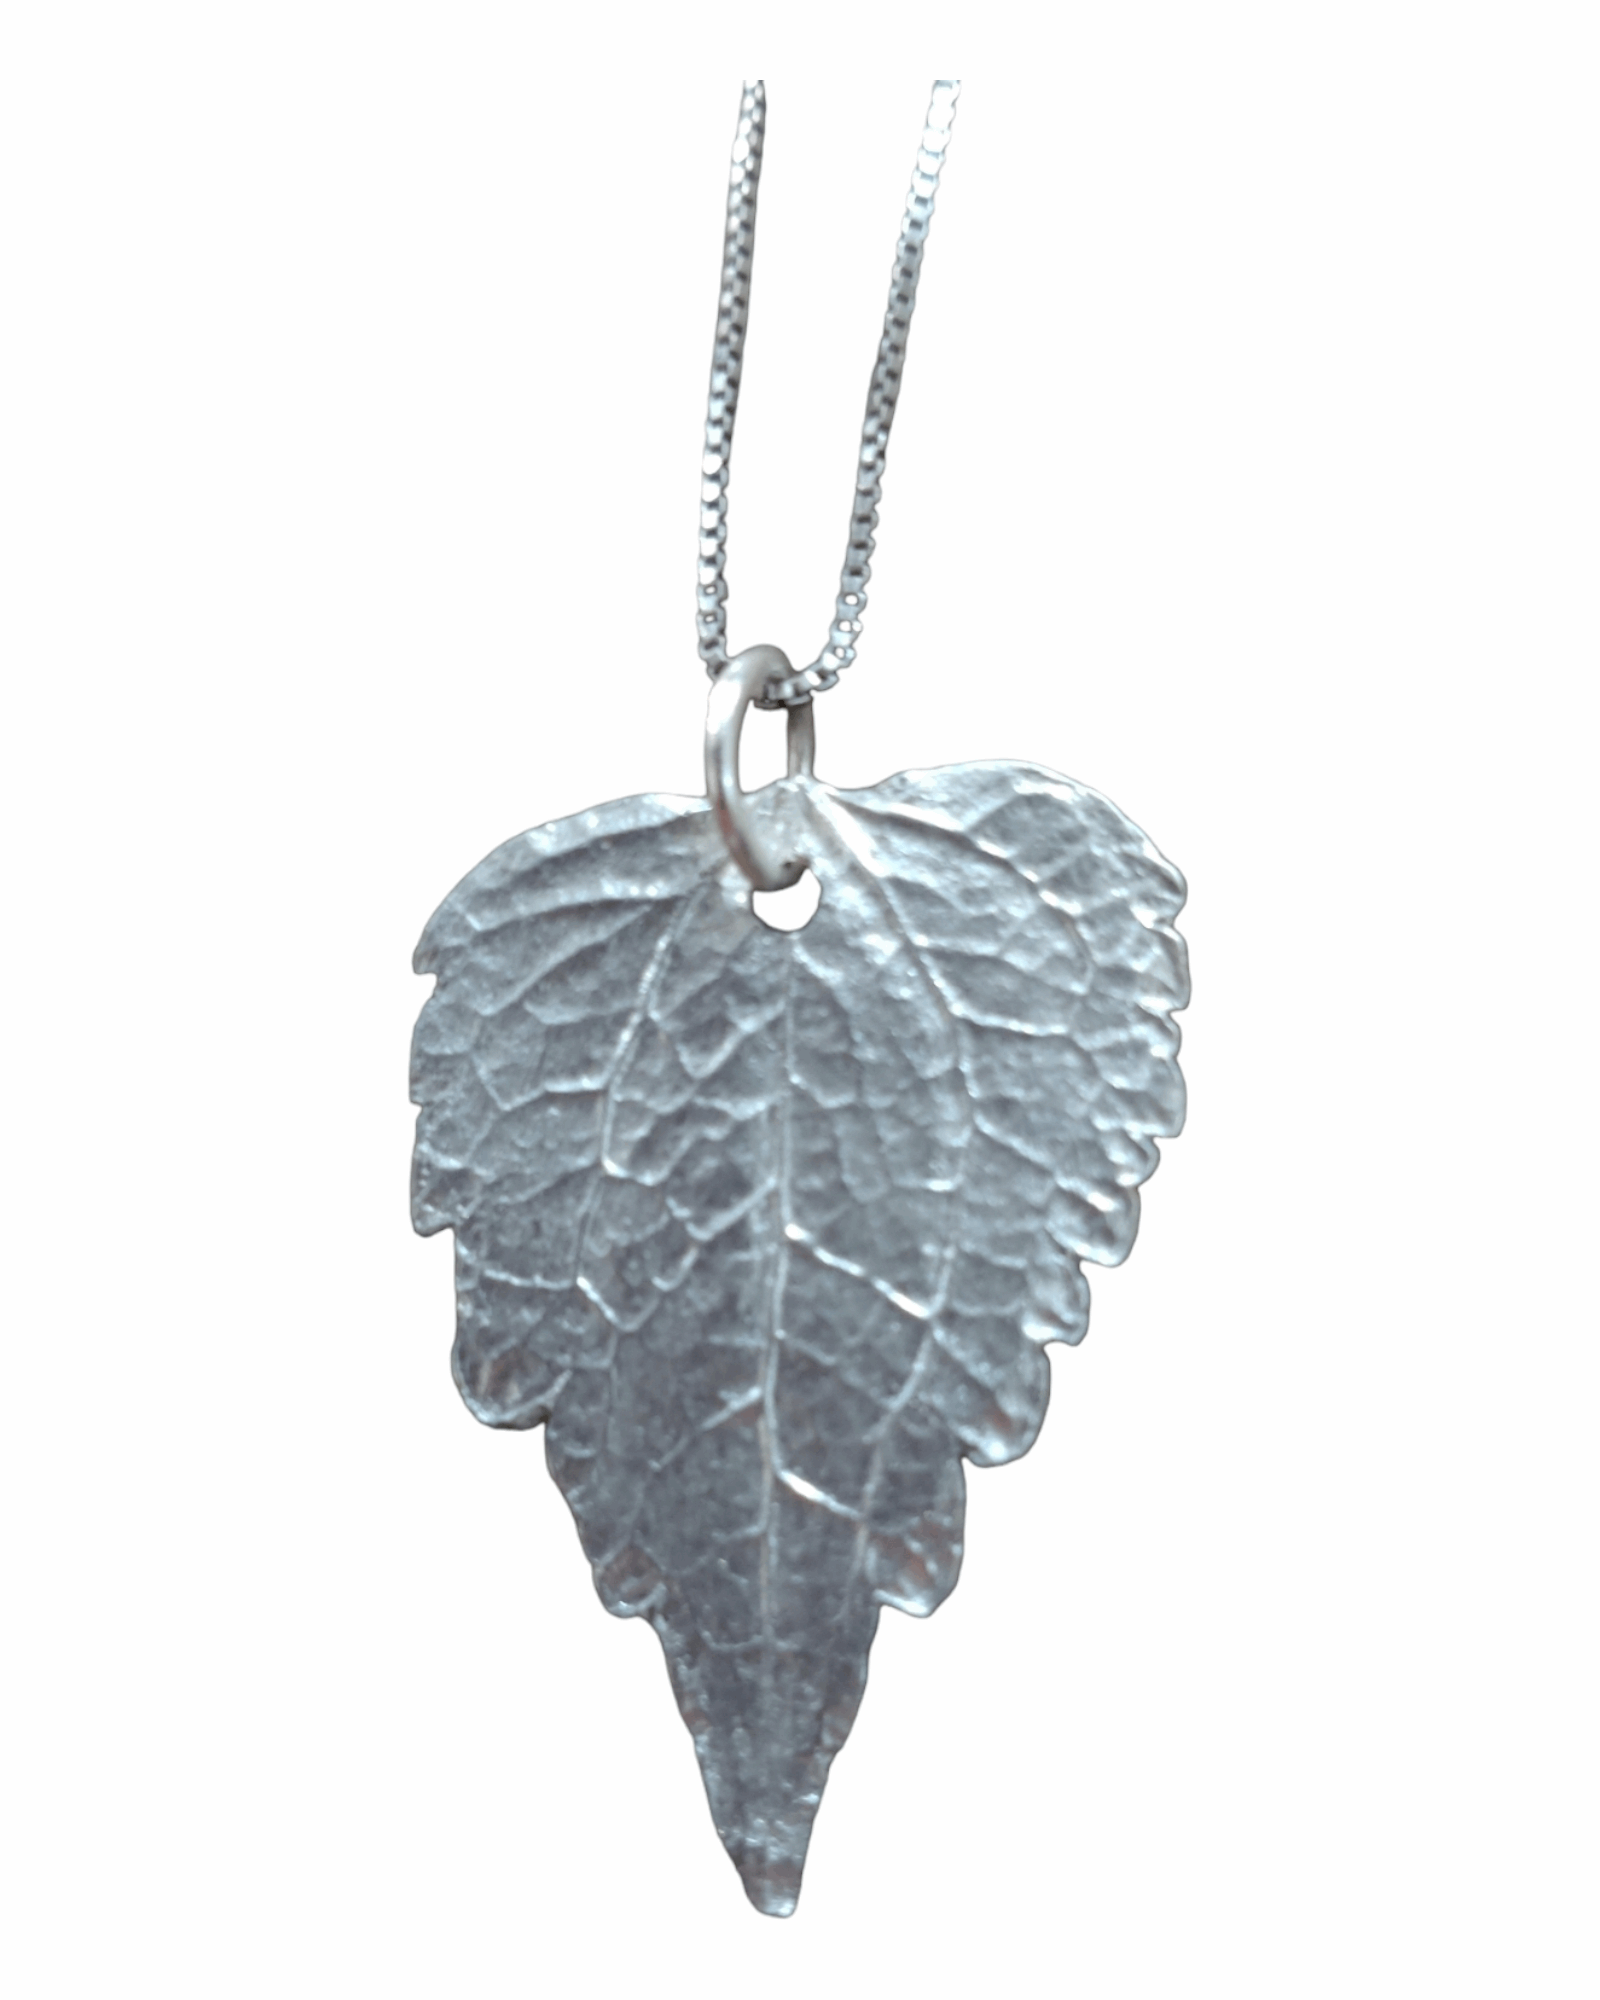 Handmade fine silver leaf pendant made from a real leaf